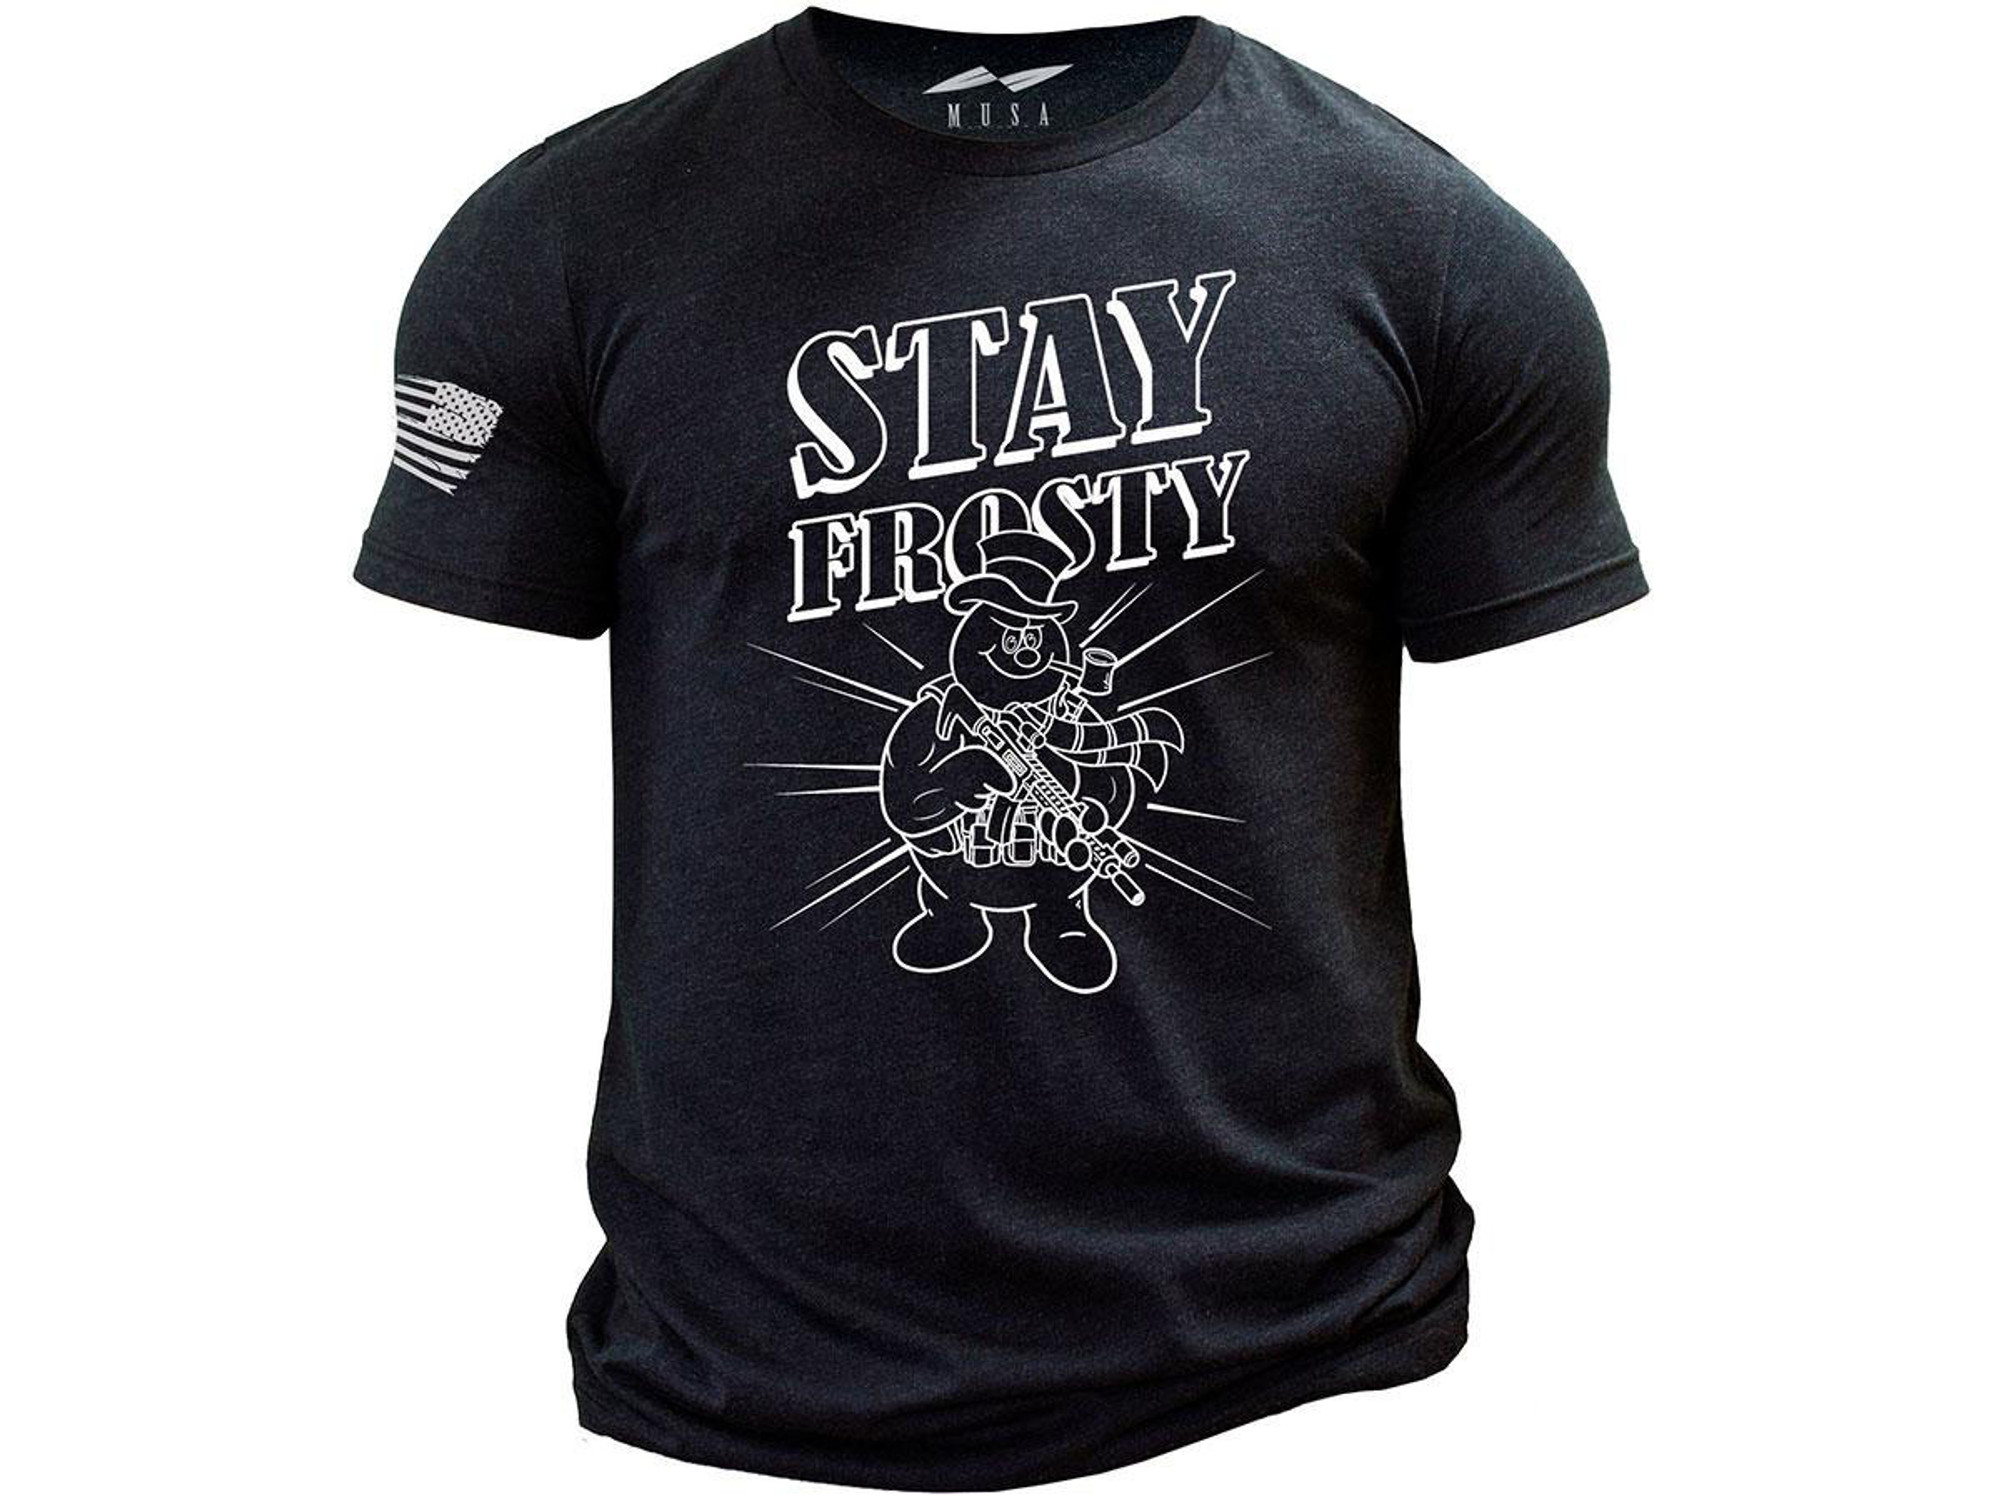 MUSA Limited Edition "Stay Frosty" Shirt (Color: Black / Medium)